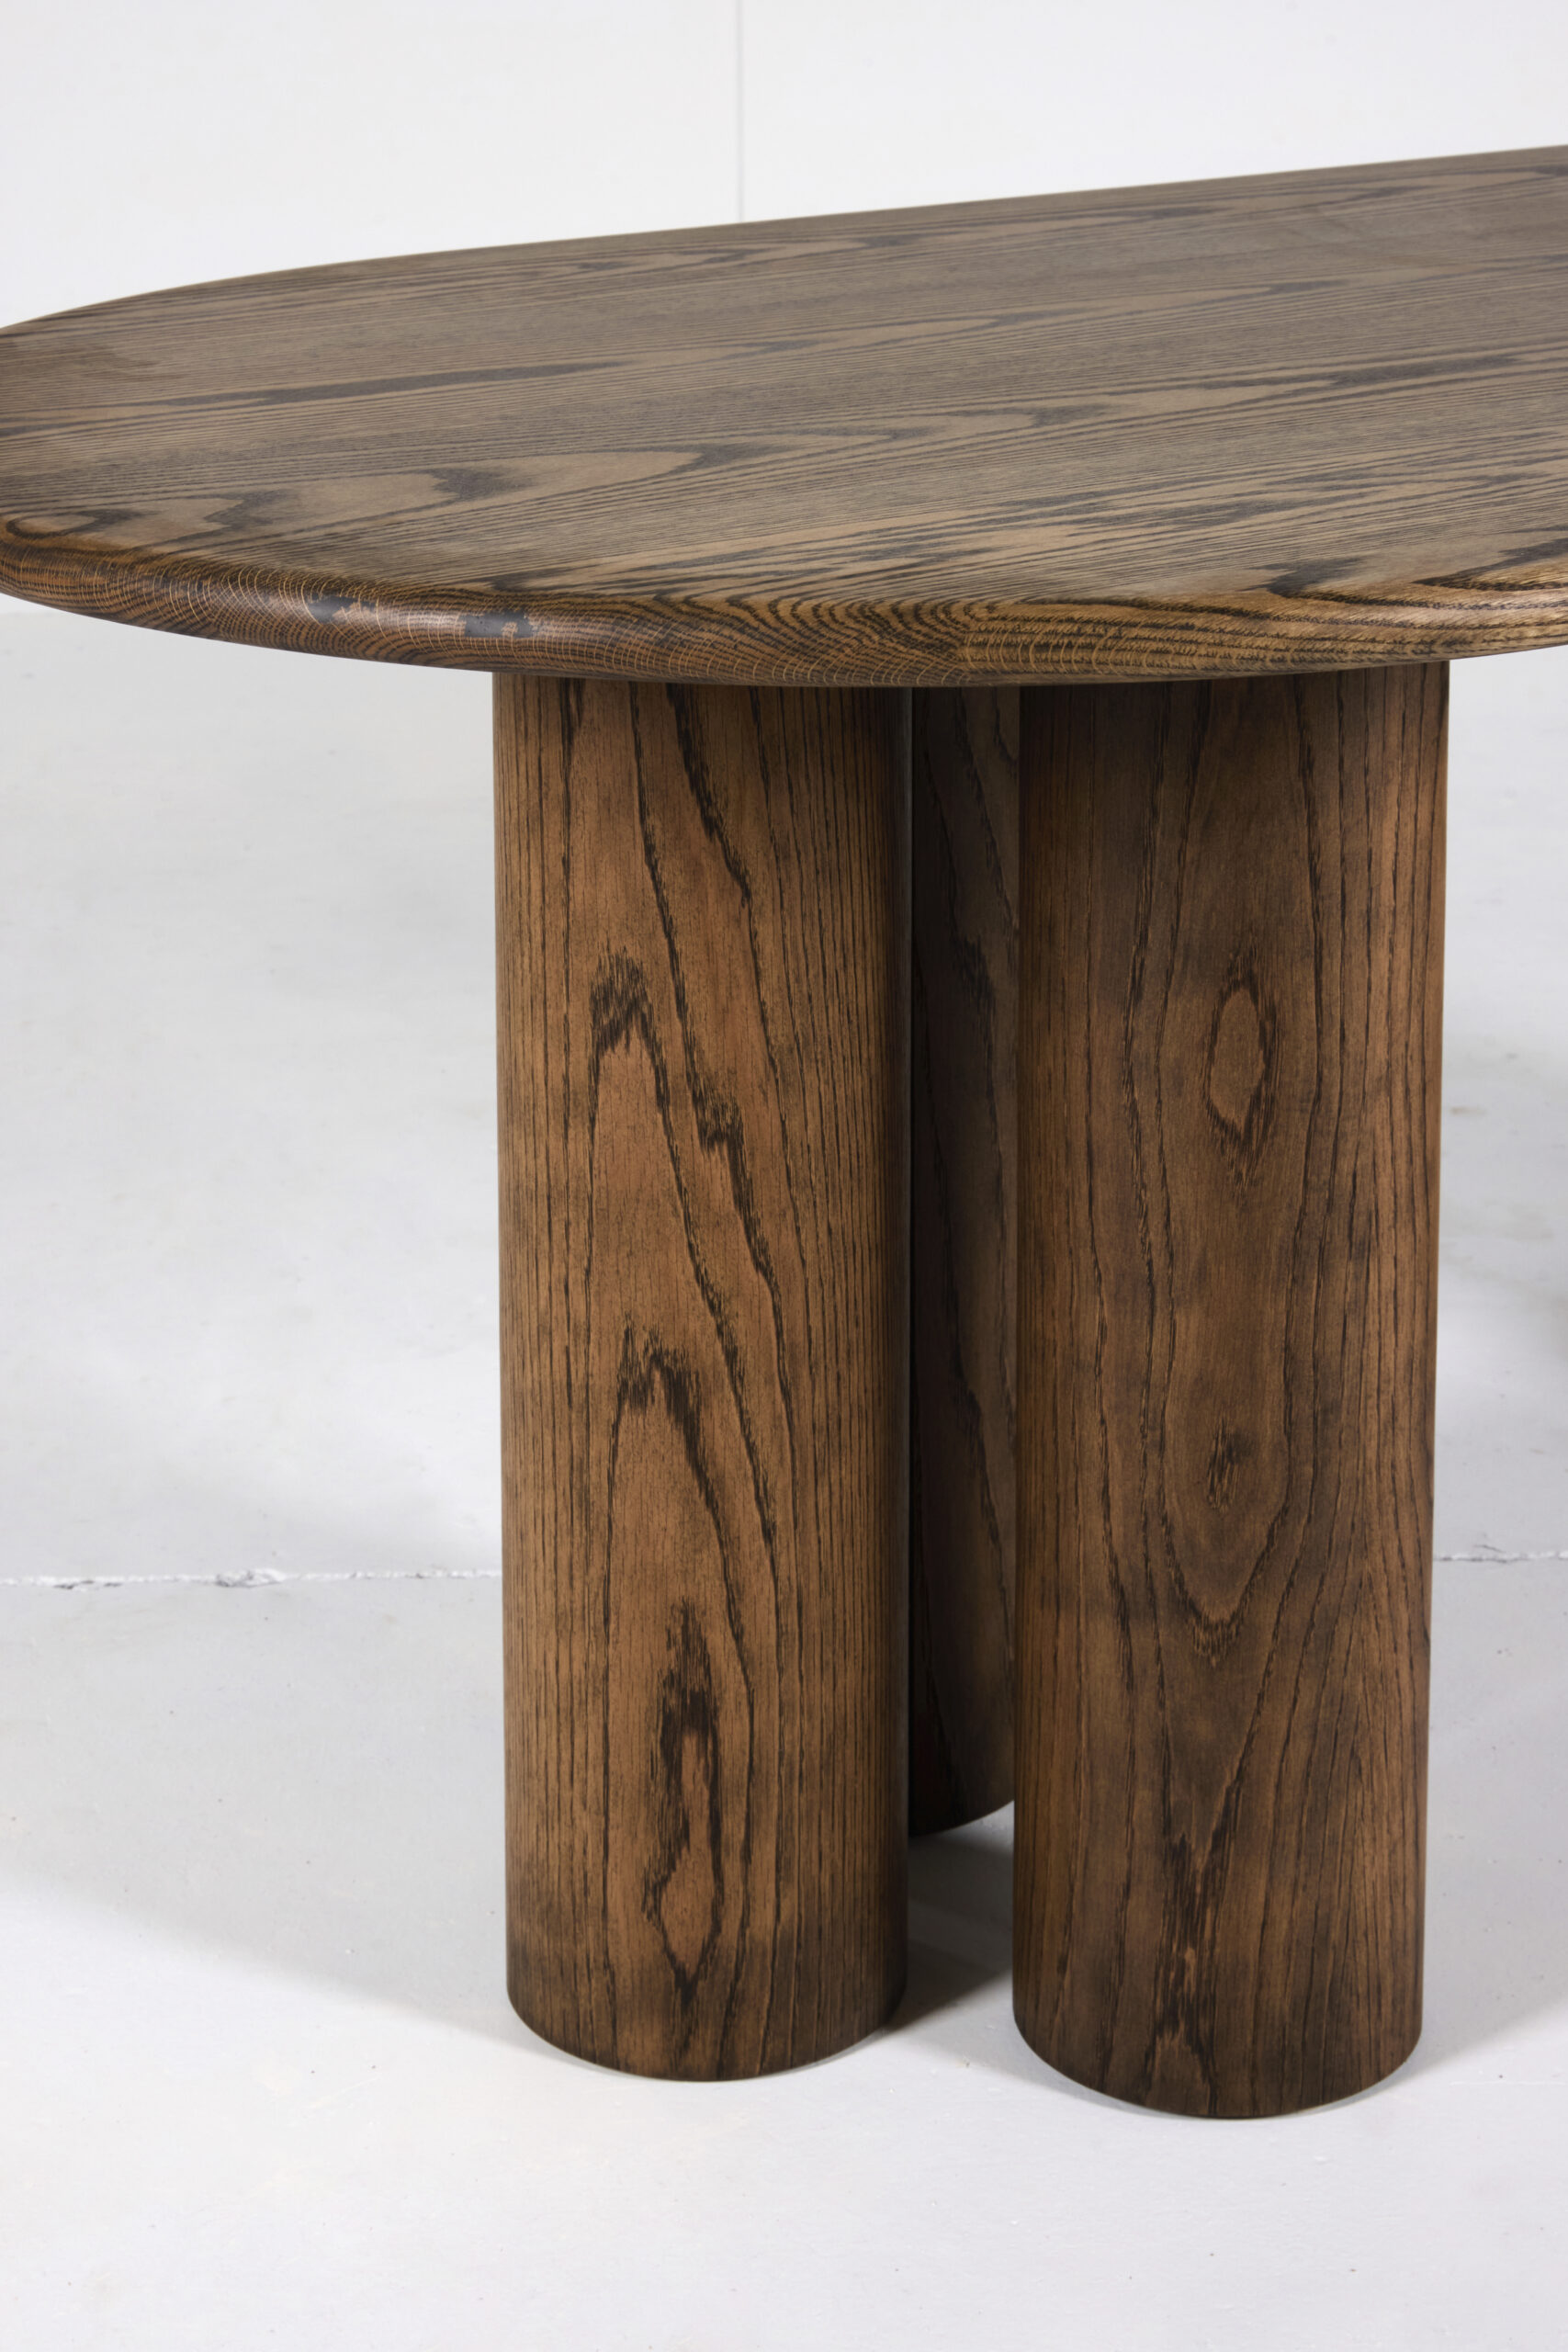 Pillar Dining Table crafted from premium timber with a sleek pencil edge and sturdy pillar base.